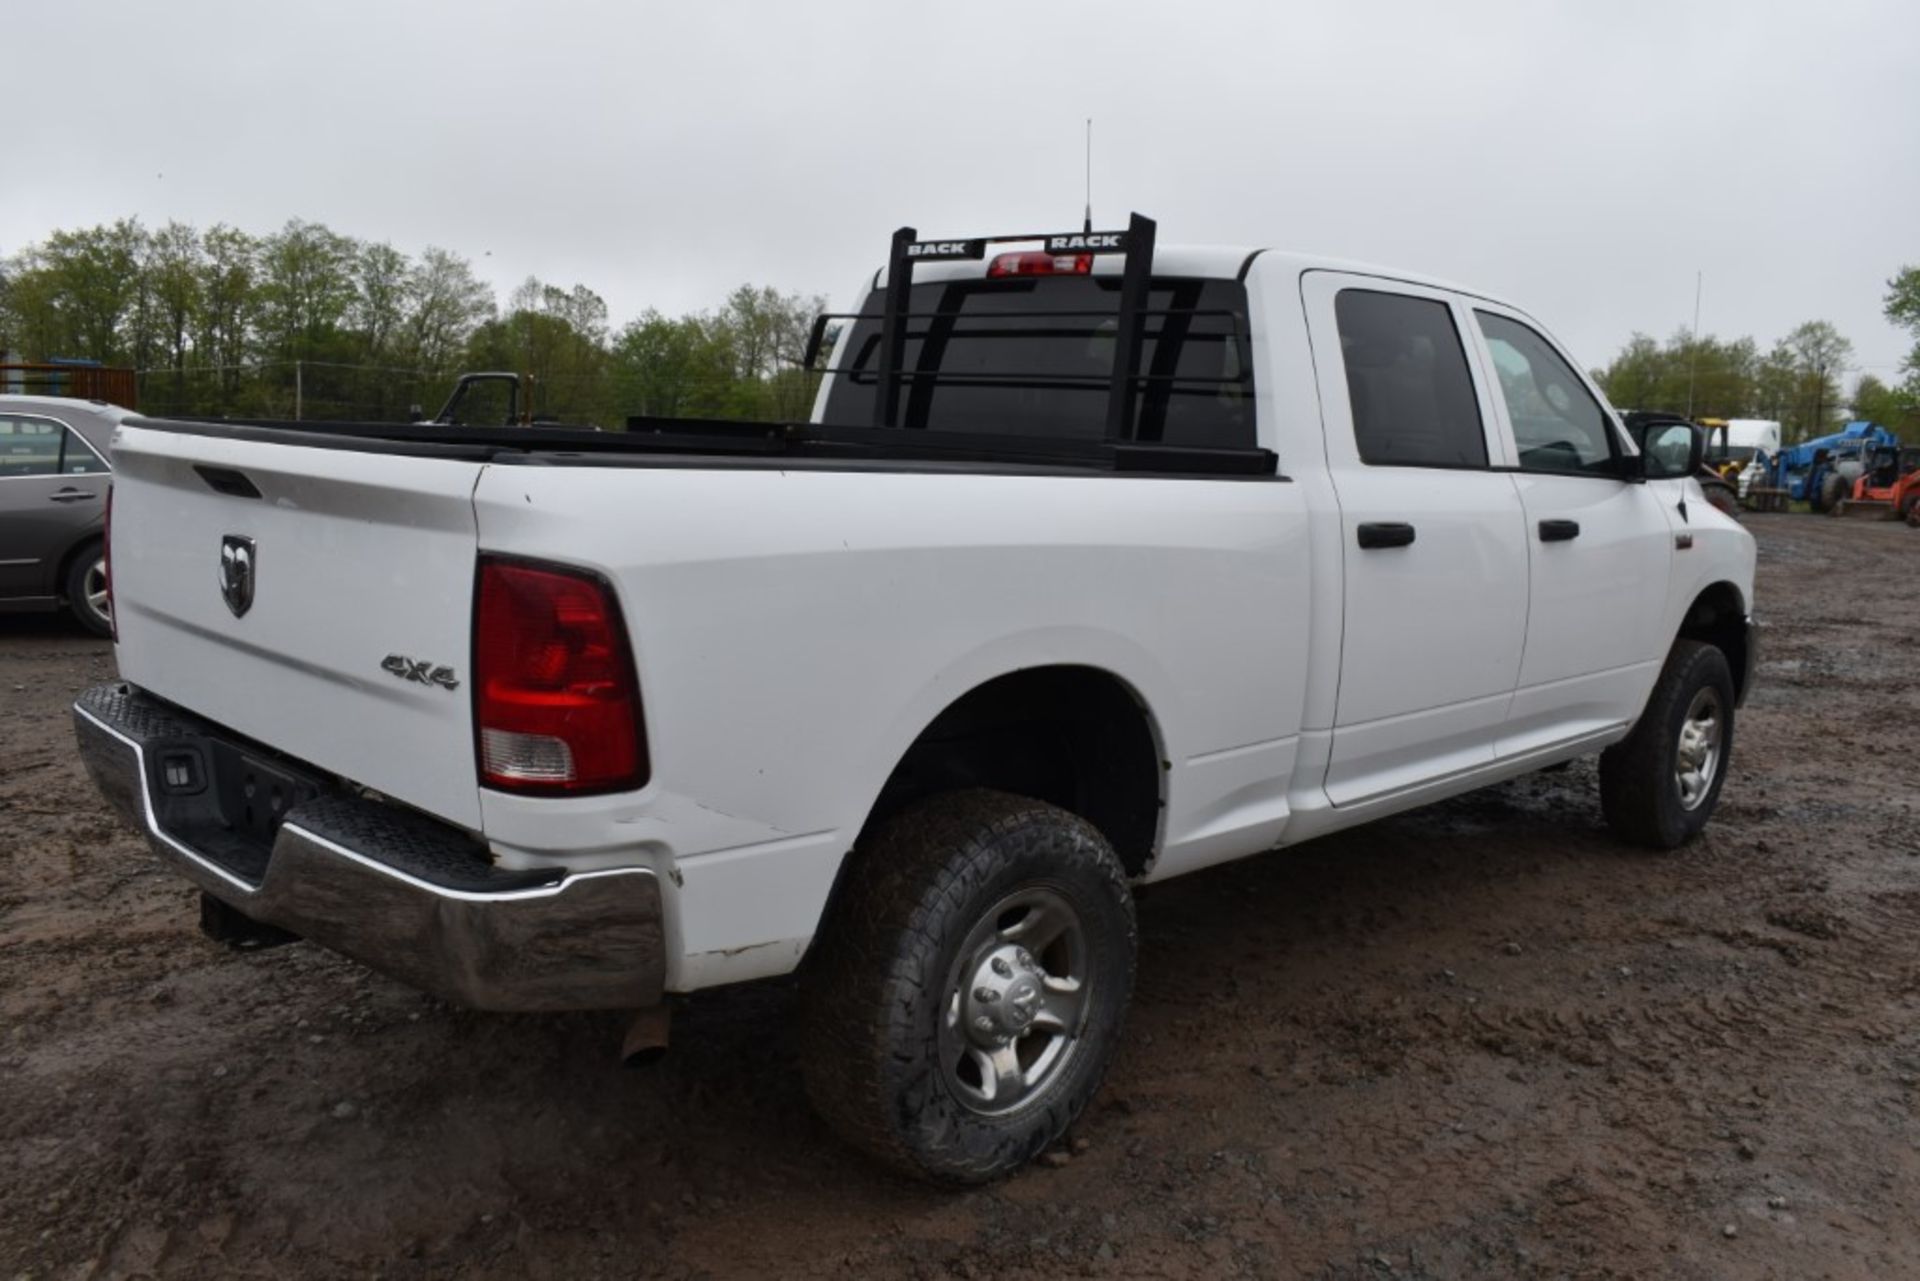 2015 Dodge Ram 2500 Truck With Title, 181238 Miles, Runs and Drives, Hemi 5.7 Gas Engine, Automatic, - Image 5 of 23